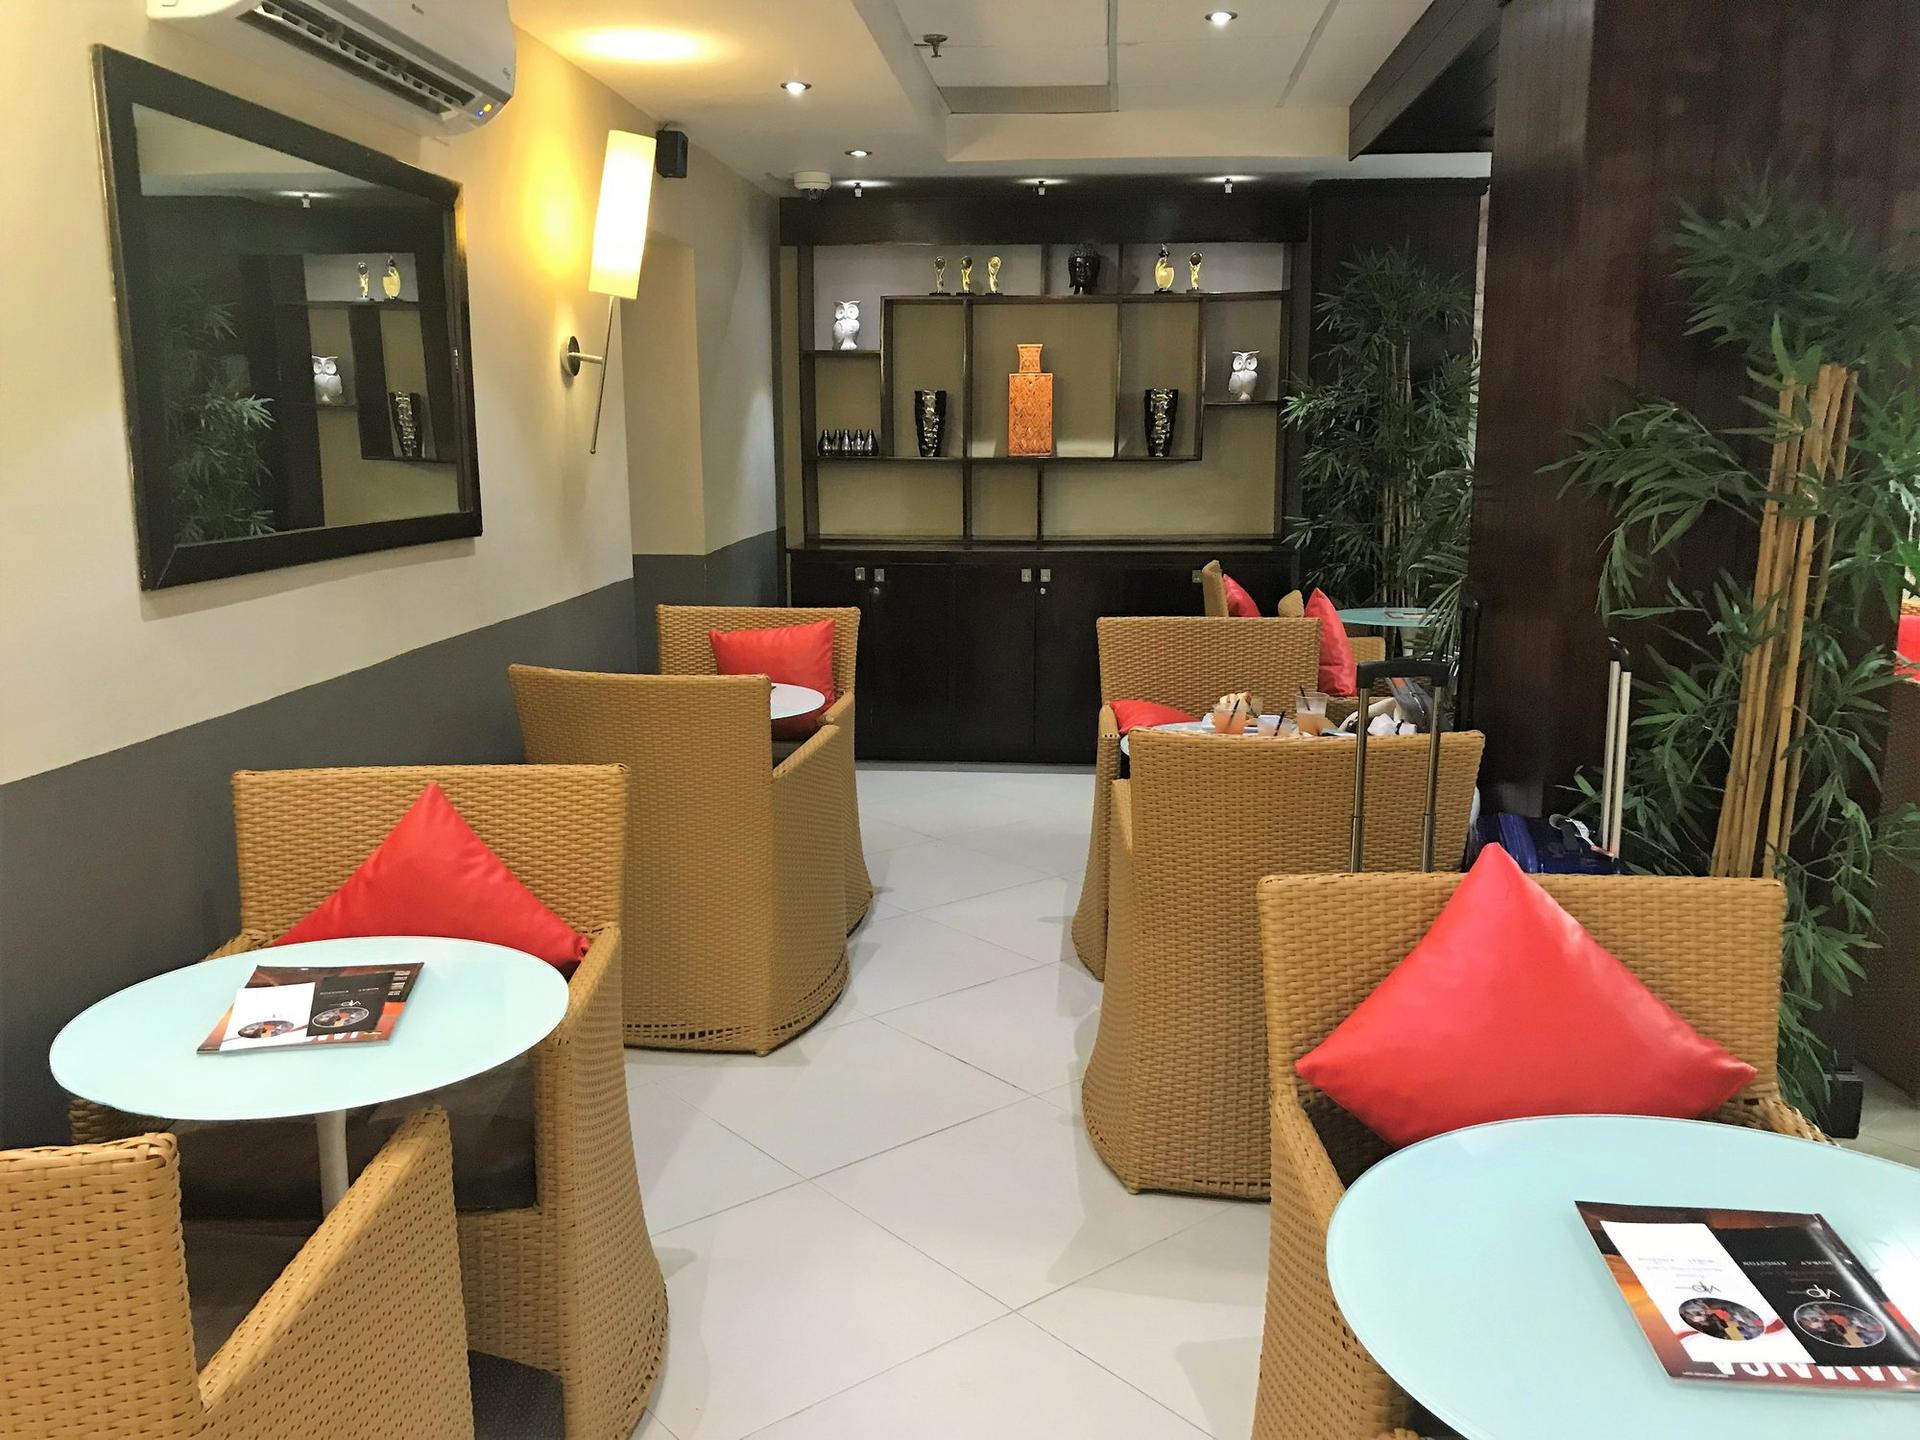 Club Mobay Arrivals Lounge image 2 of 17